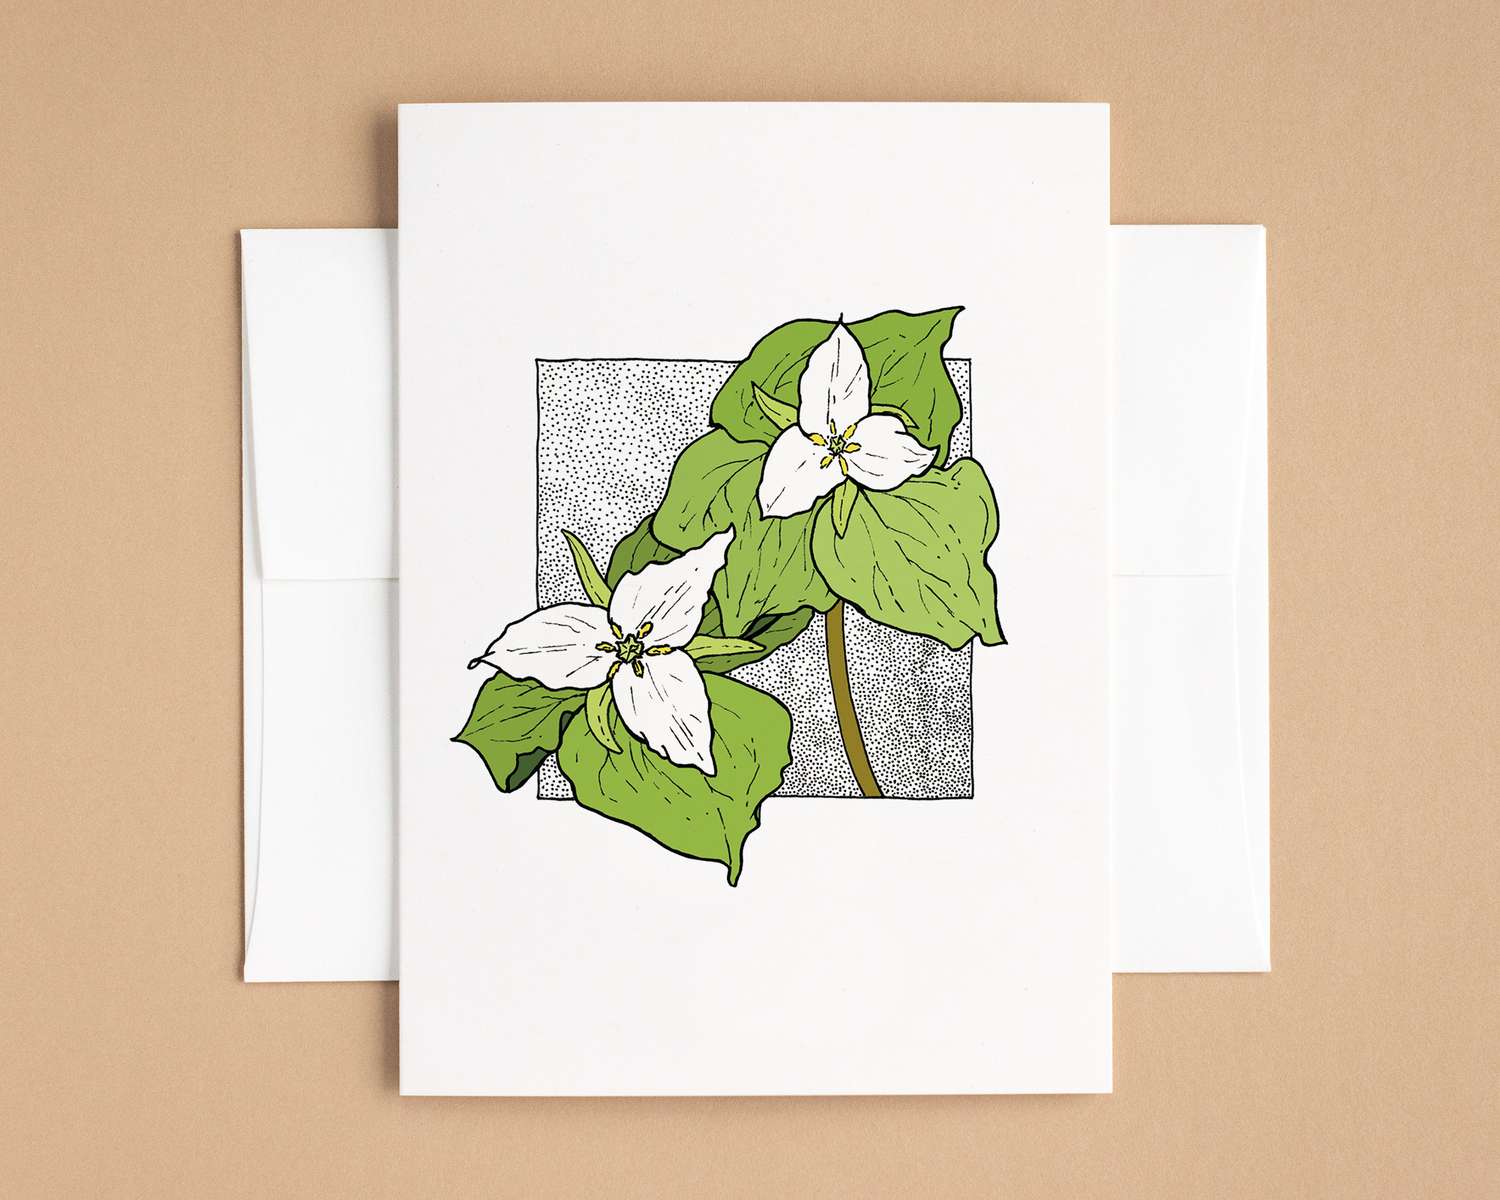 A vertical white card depicts two trillium flowers against a black stipple background. The card lies on top of a white envelope, which lies on top of a brown backdrop.